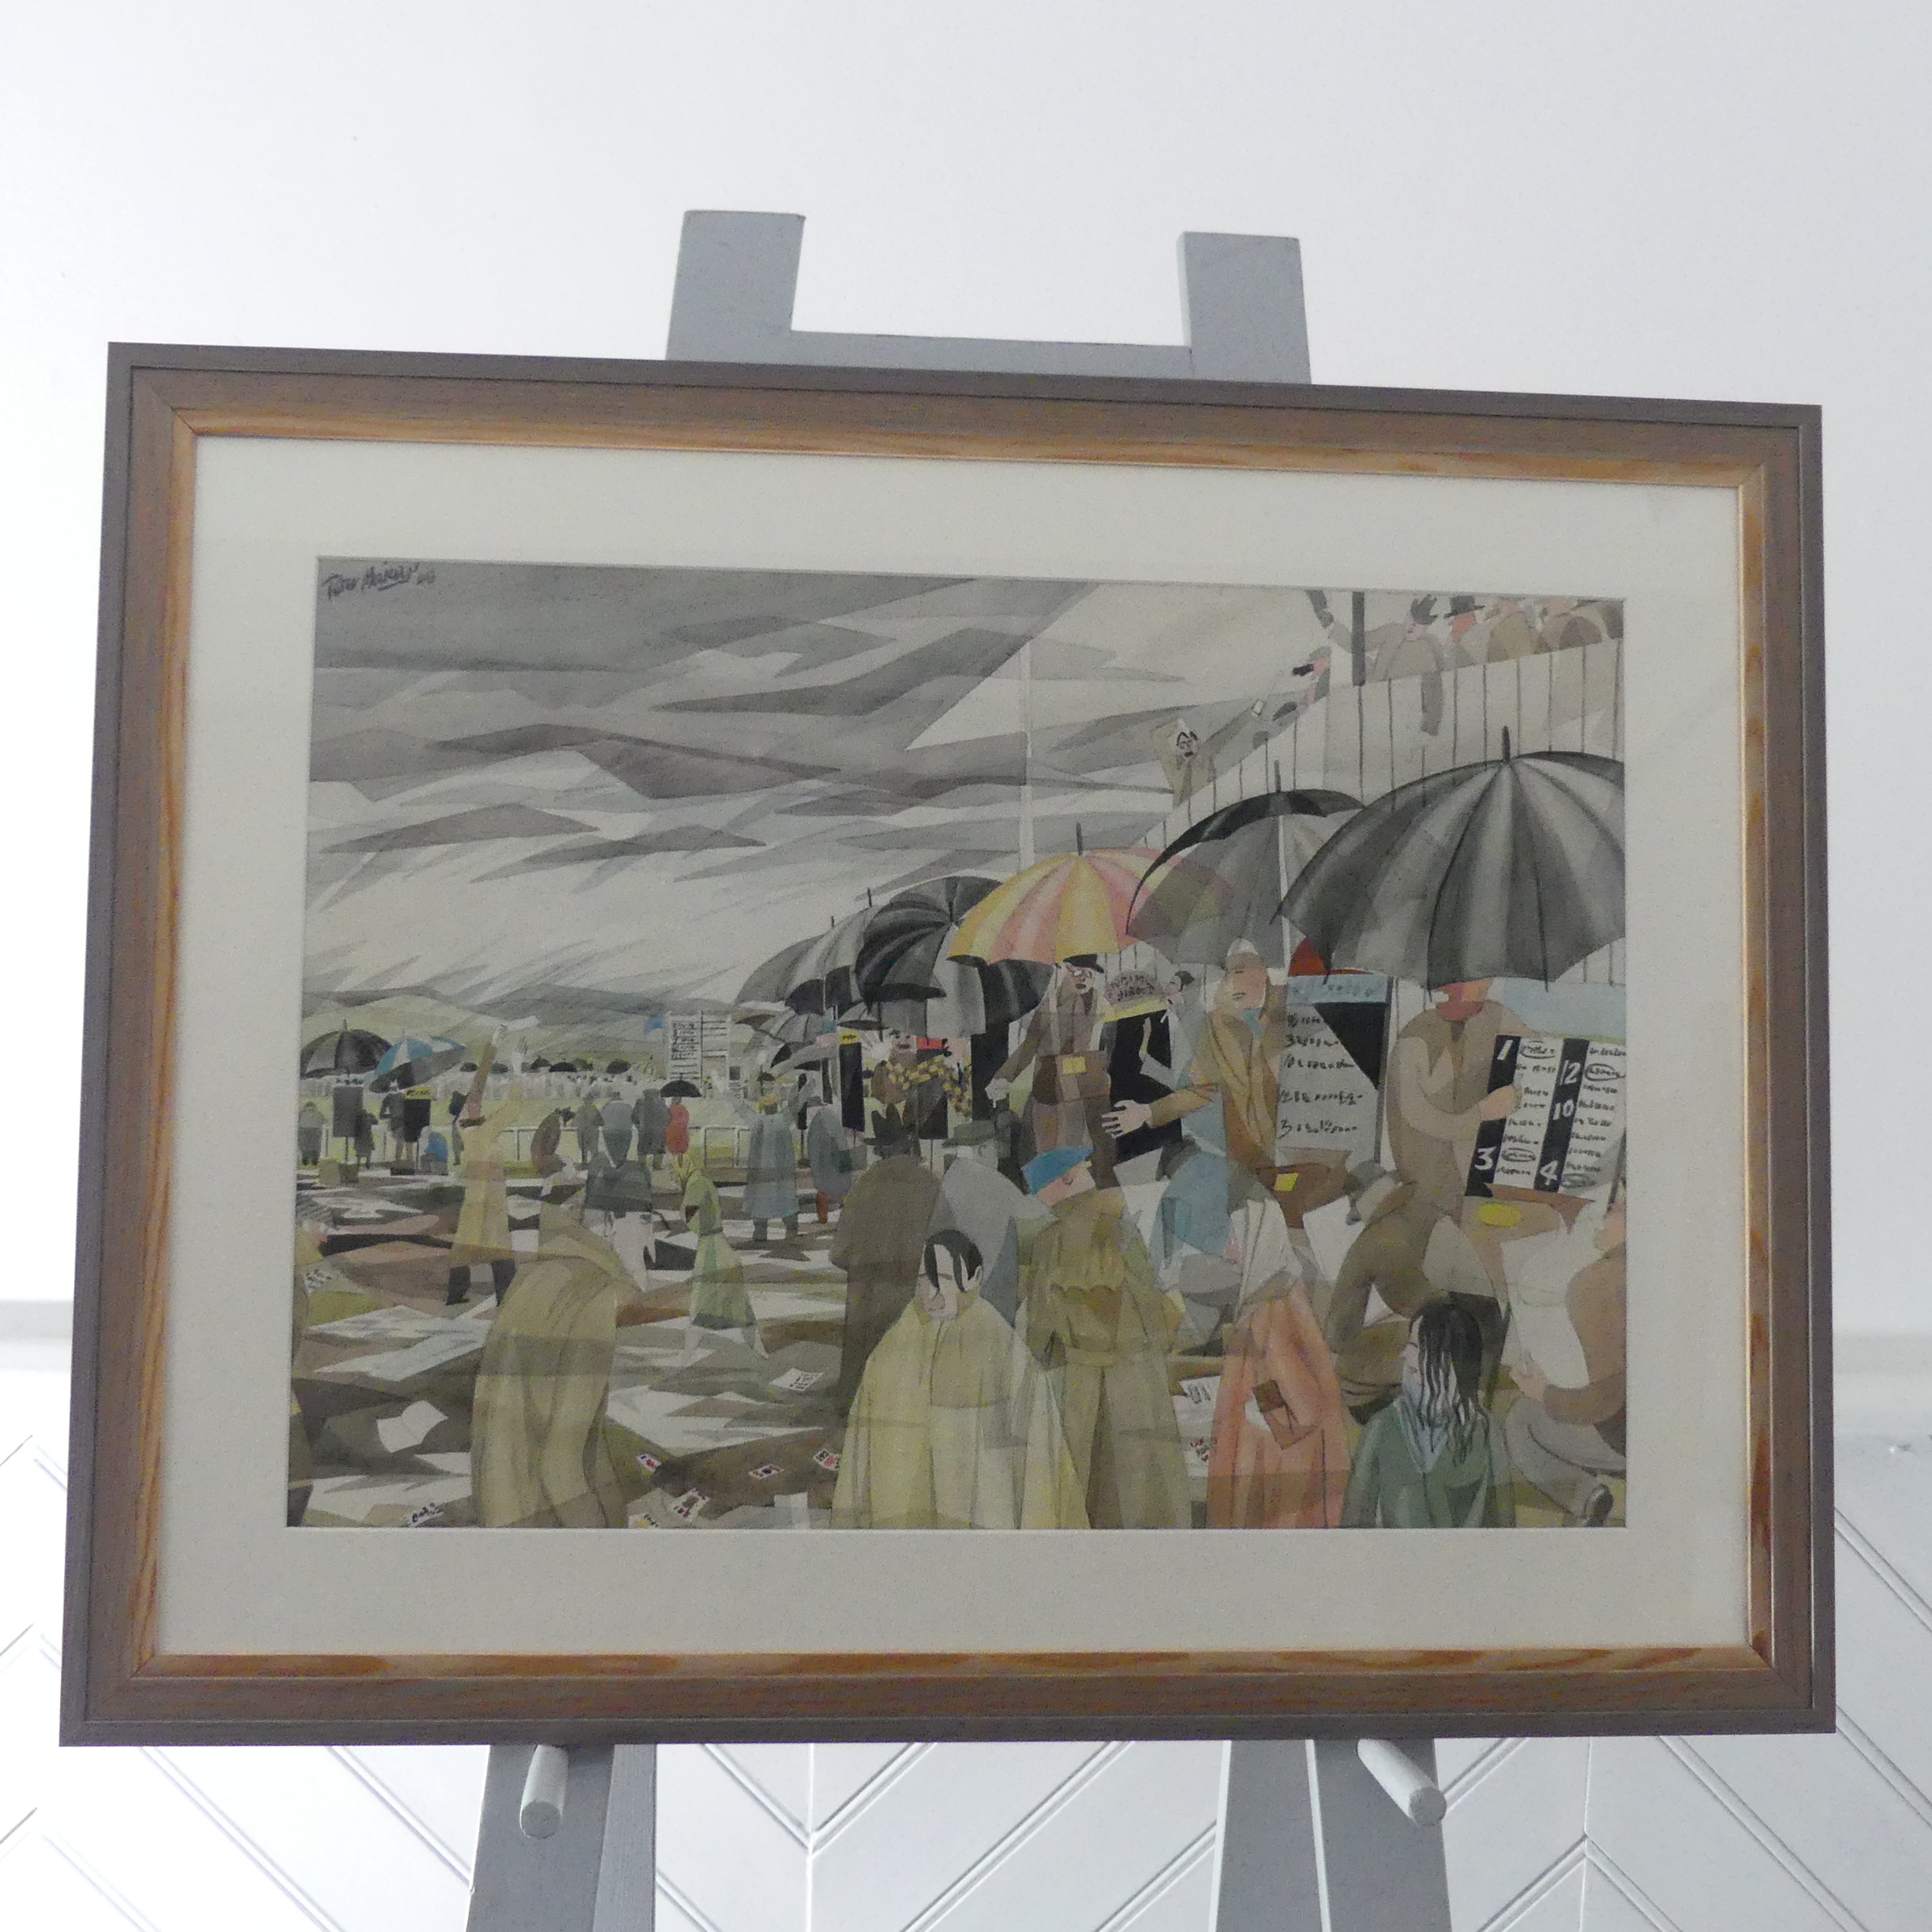 20th century school, A Day at the Races, pencil and watercolour, signed "Peter Maisey (?)" and dated - Image 2 of 4